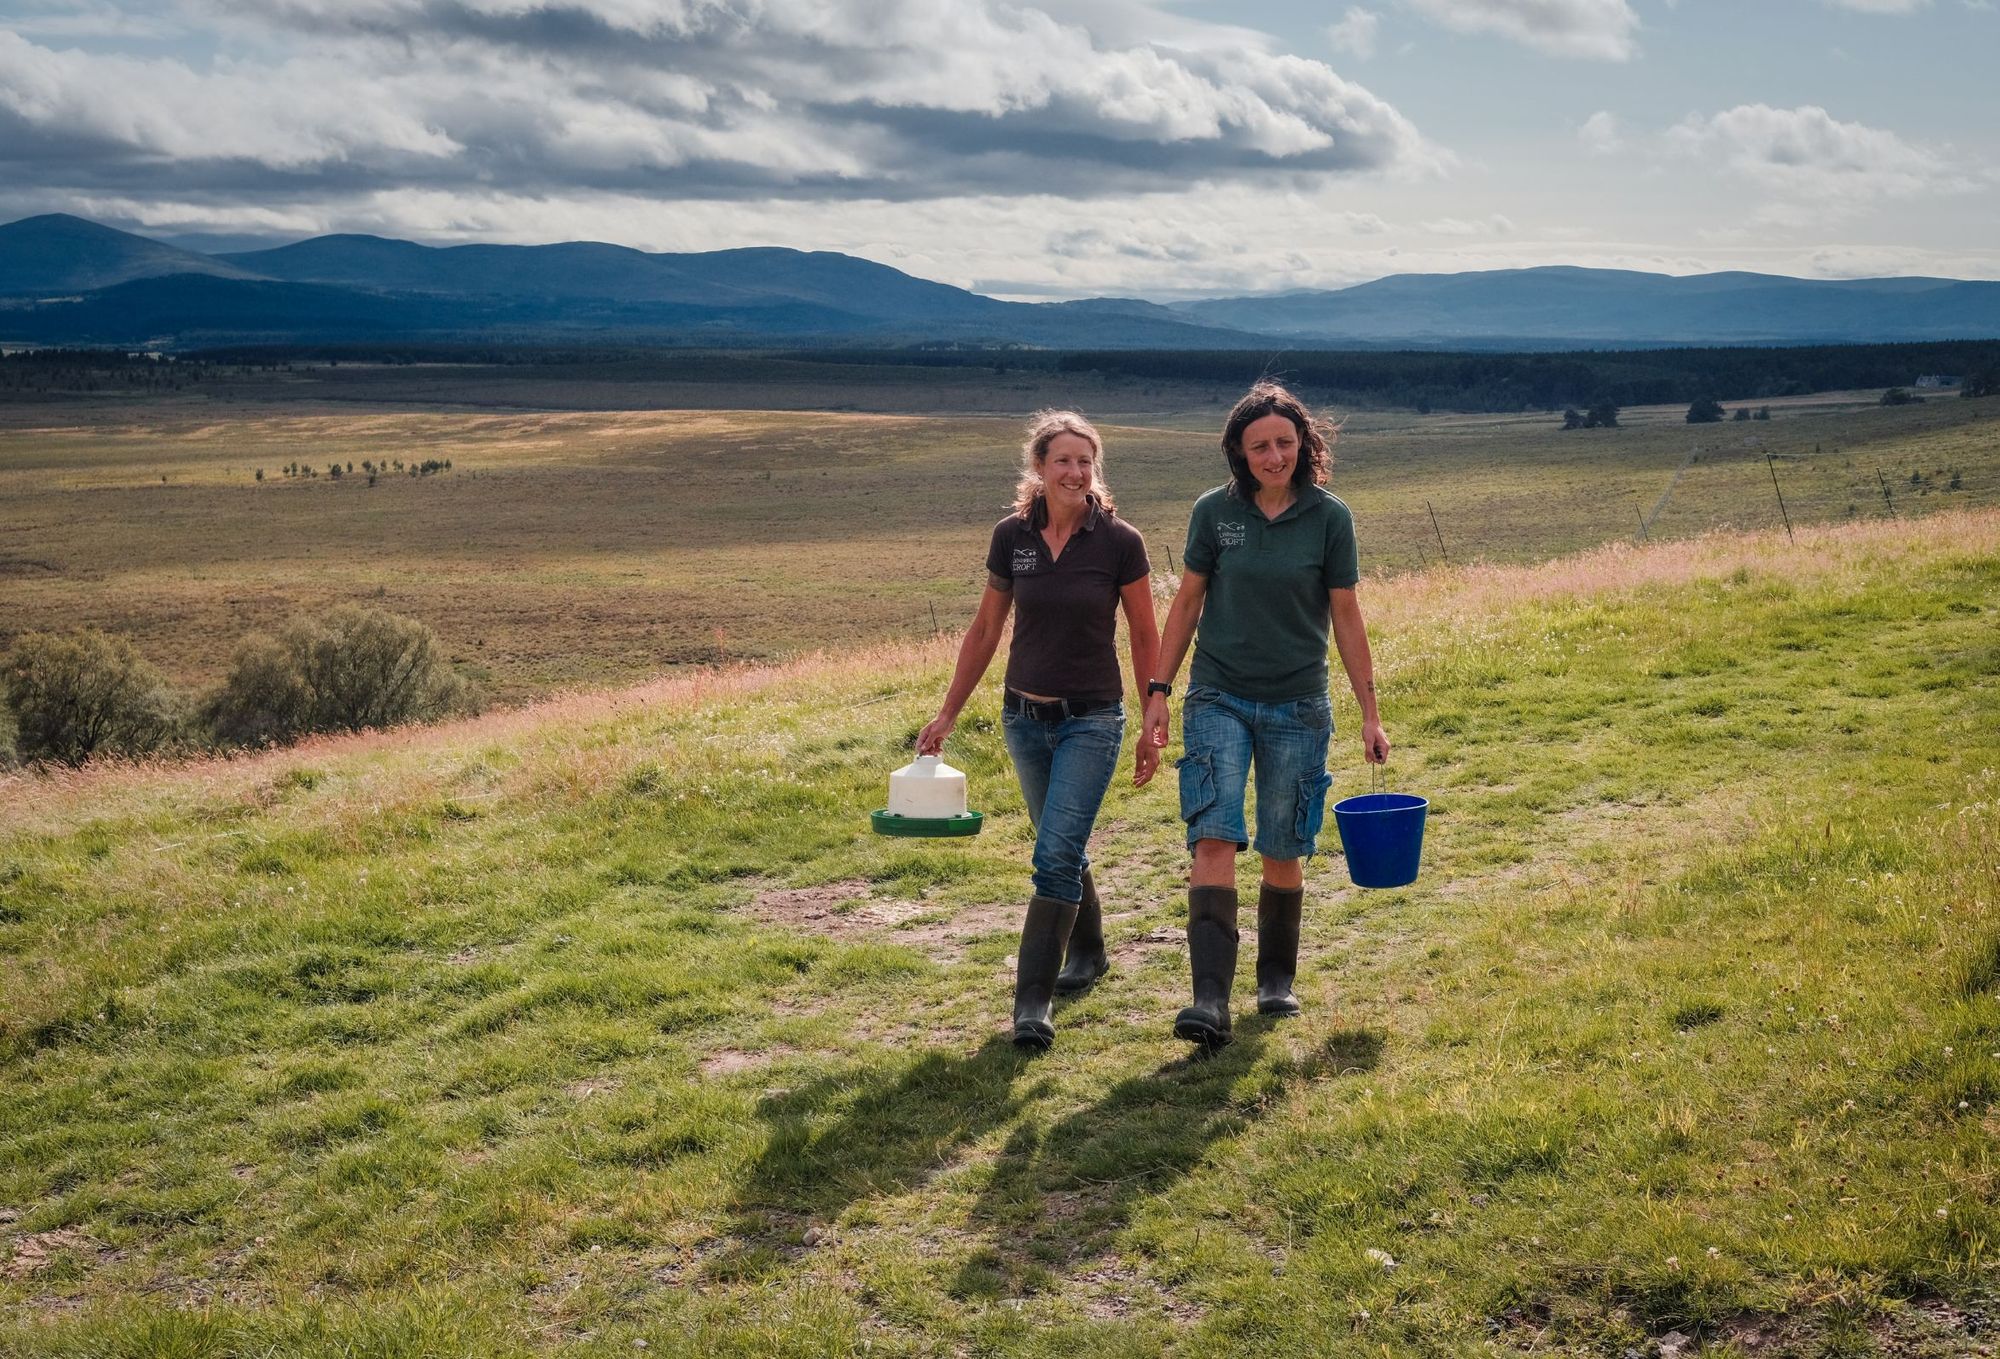 Sandra Baer and Lynn Cassells on their way to feed the chickens in their Highland croft.